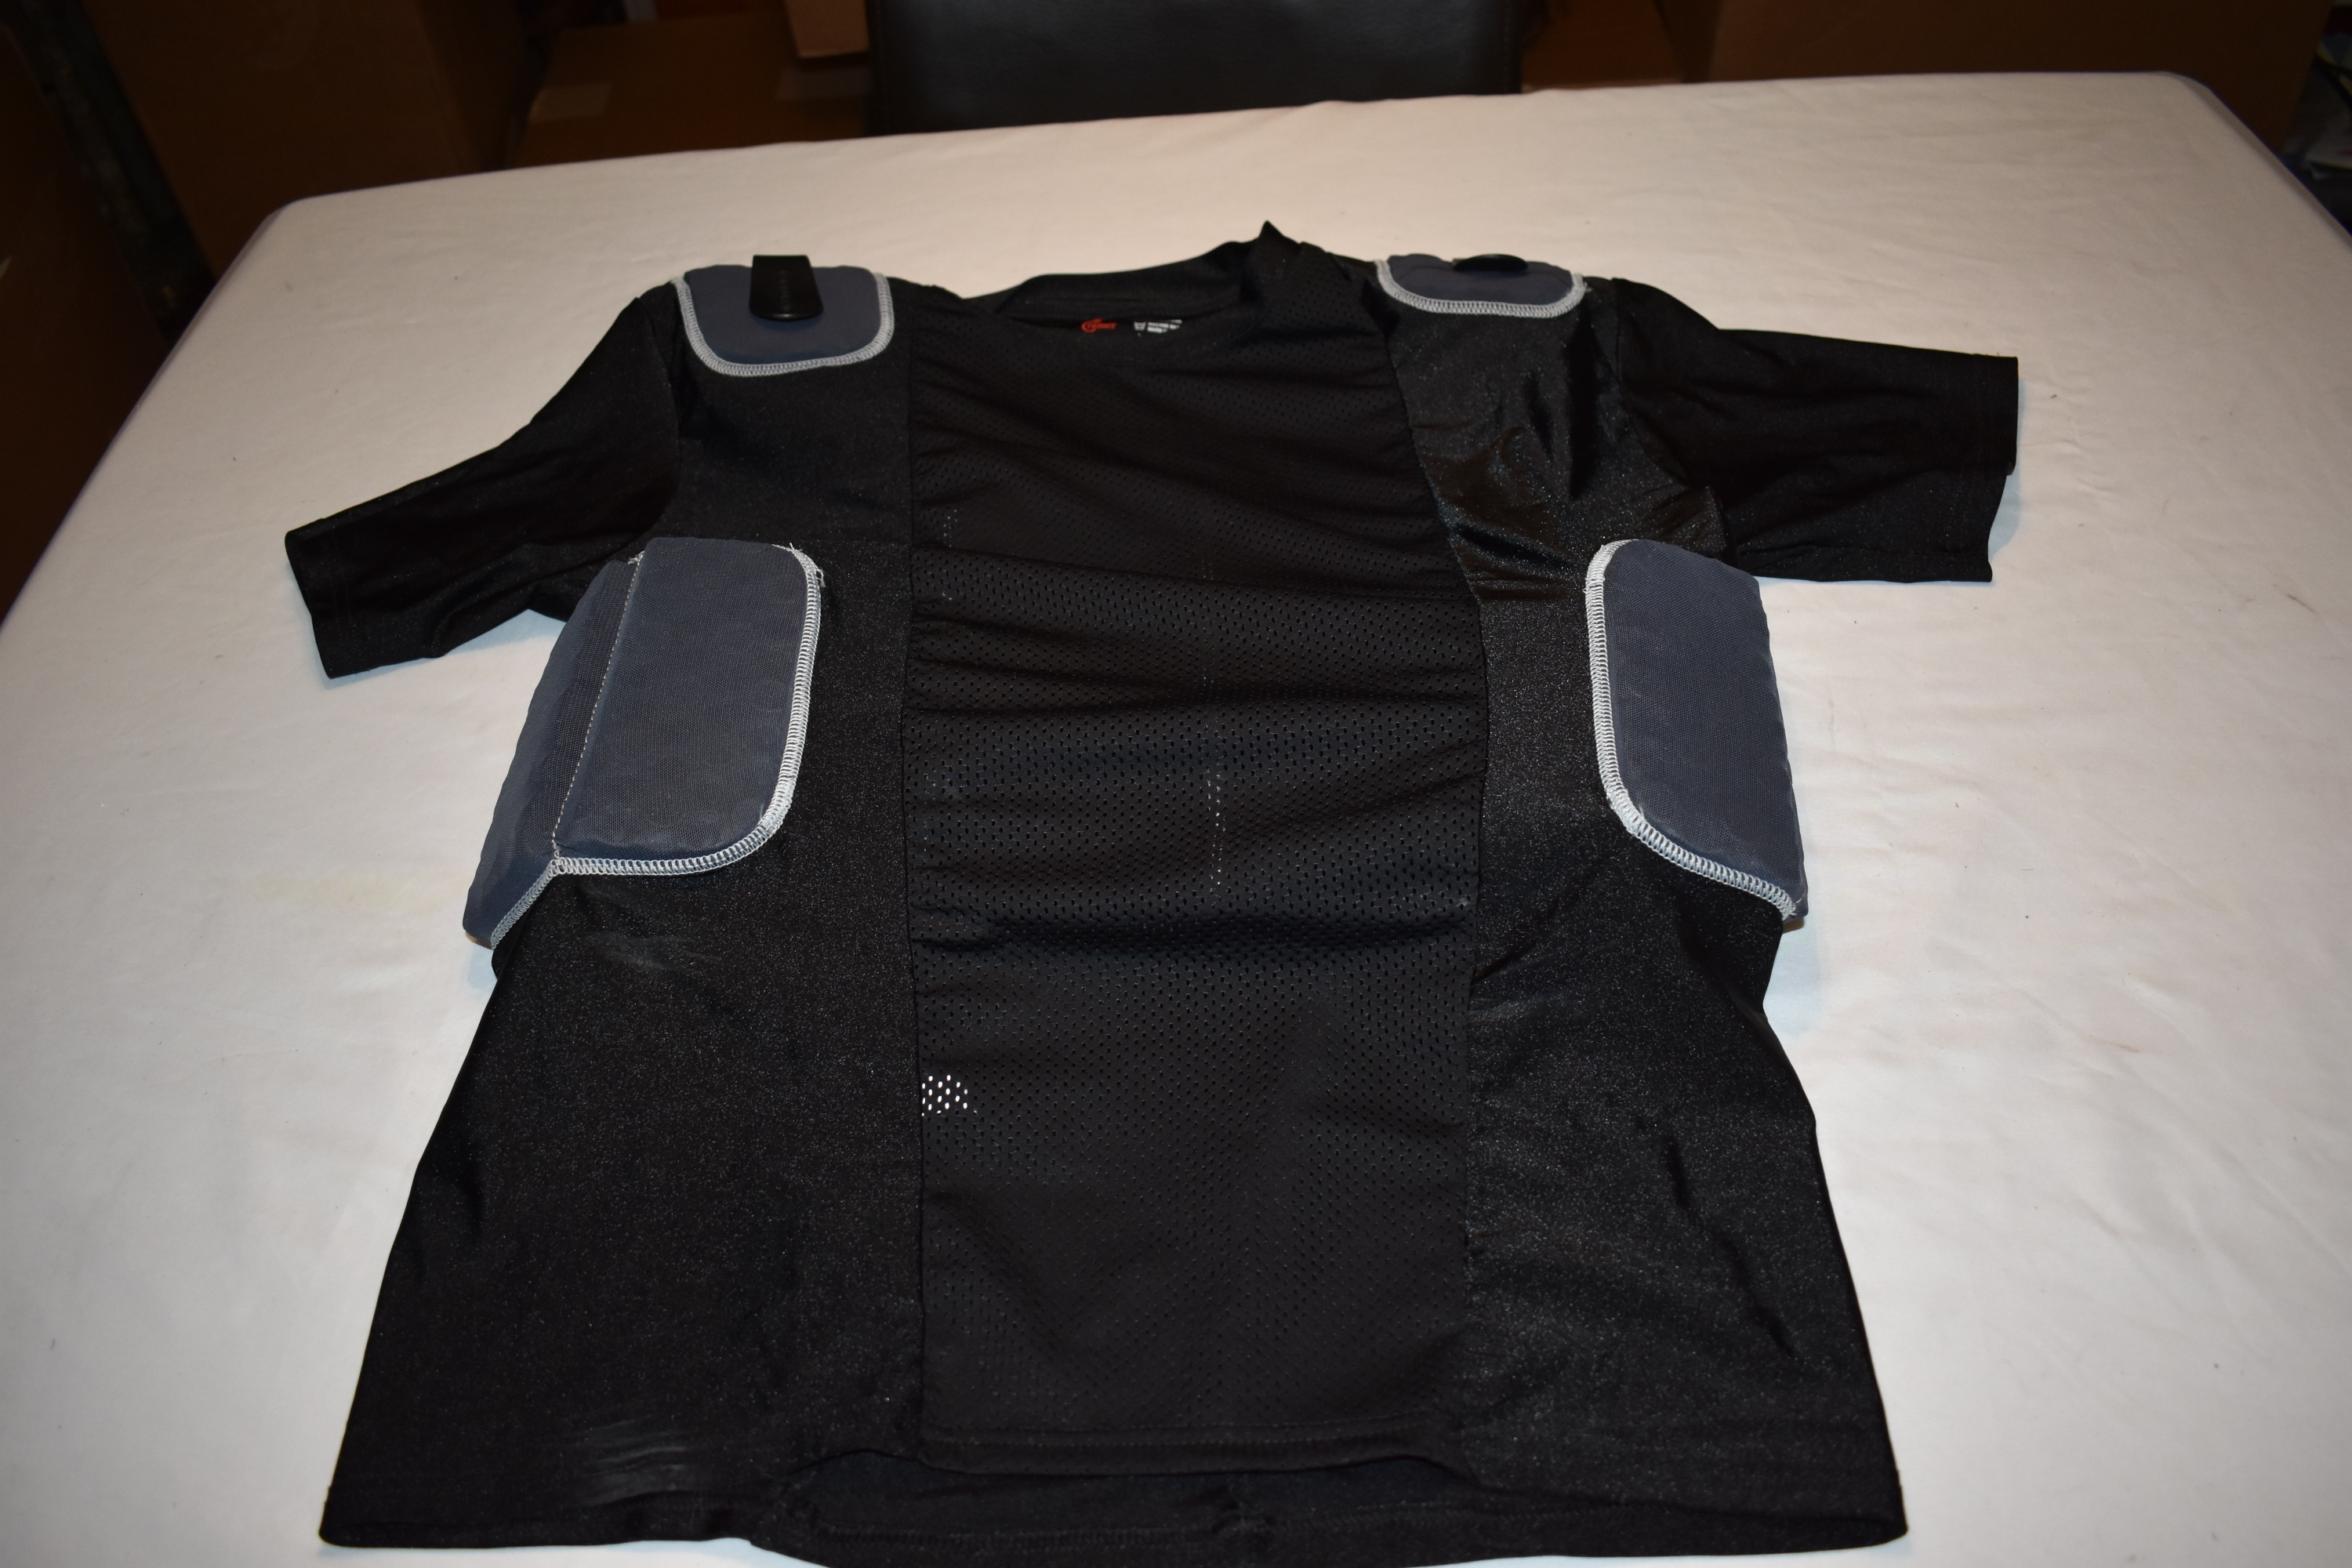 NEW - Cramer Lightning 5 Pad Compression Football Shirt w/Rib, Spine and Clavicle Pads, Black, Large